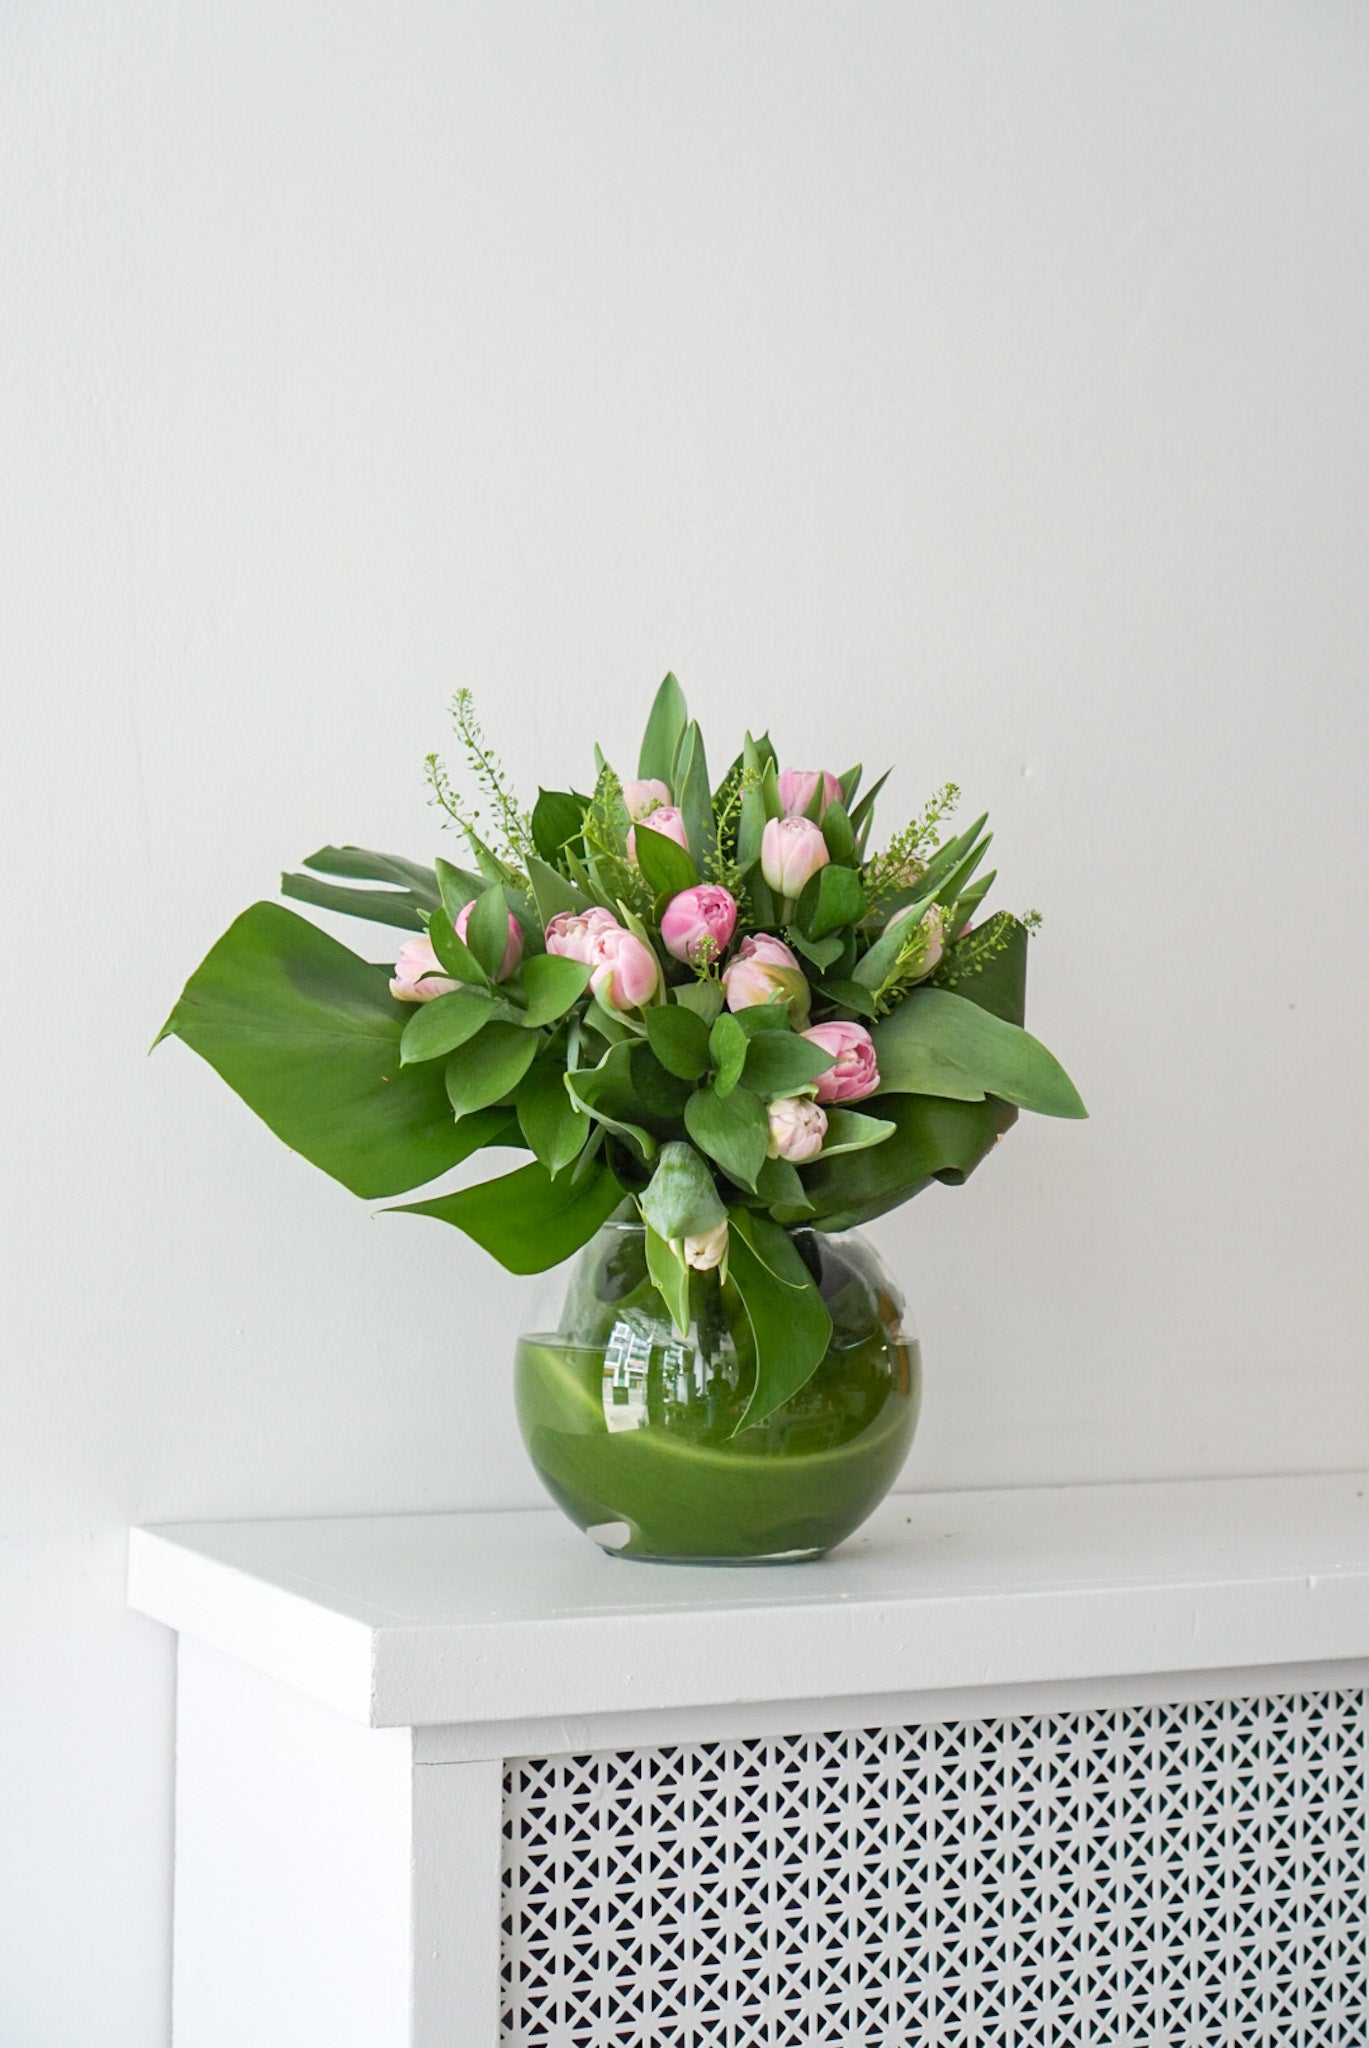  A design of premium double Dutch tulips and presentation that highlight tulips' natural beauty. This arrangement is the perfect gift for your lover, friend, or someone special that loves Tulips.  Approx. Overall Dimensions: 11"L x 12"H. Base Dimensions: 6" x 8" 